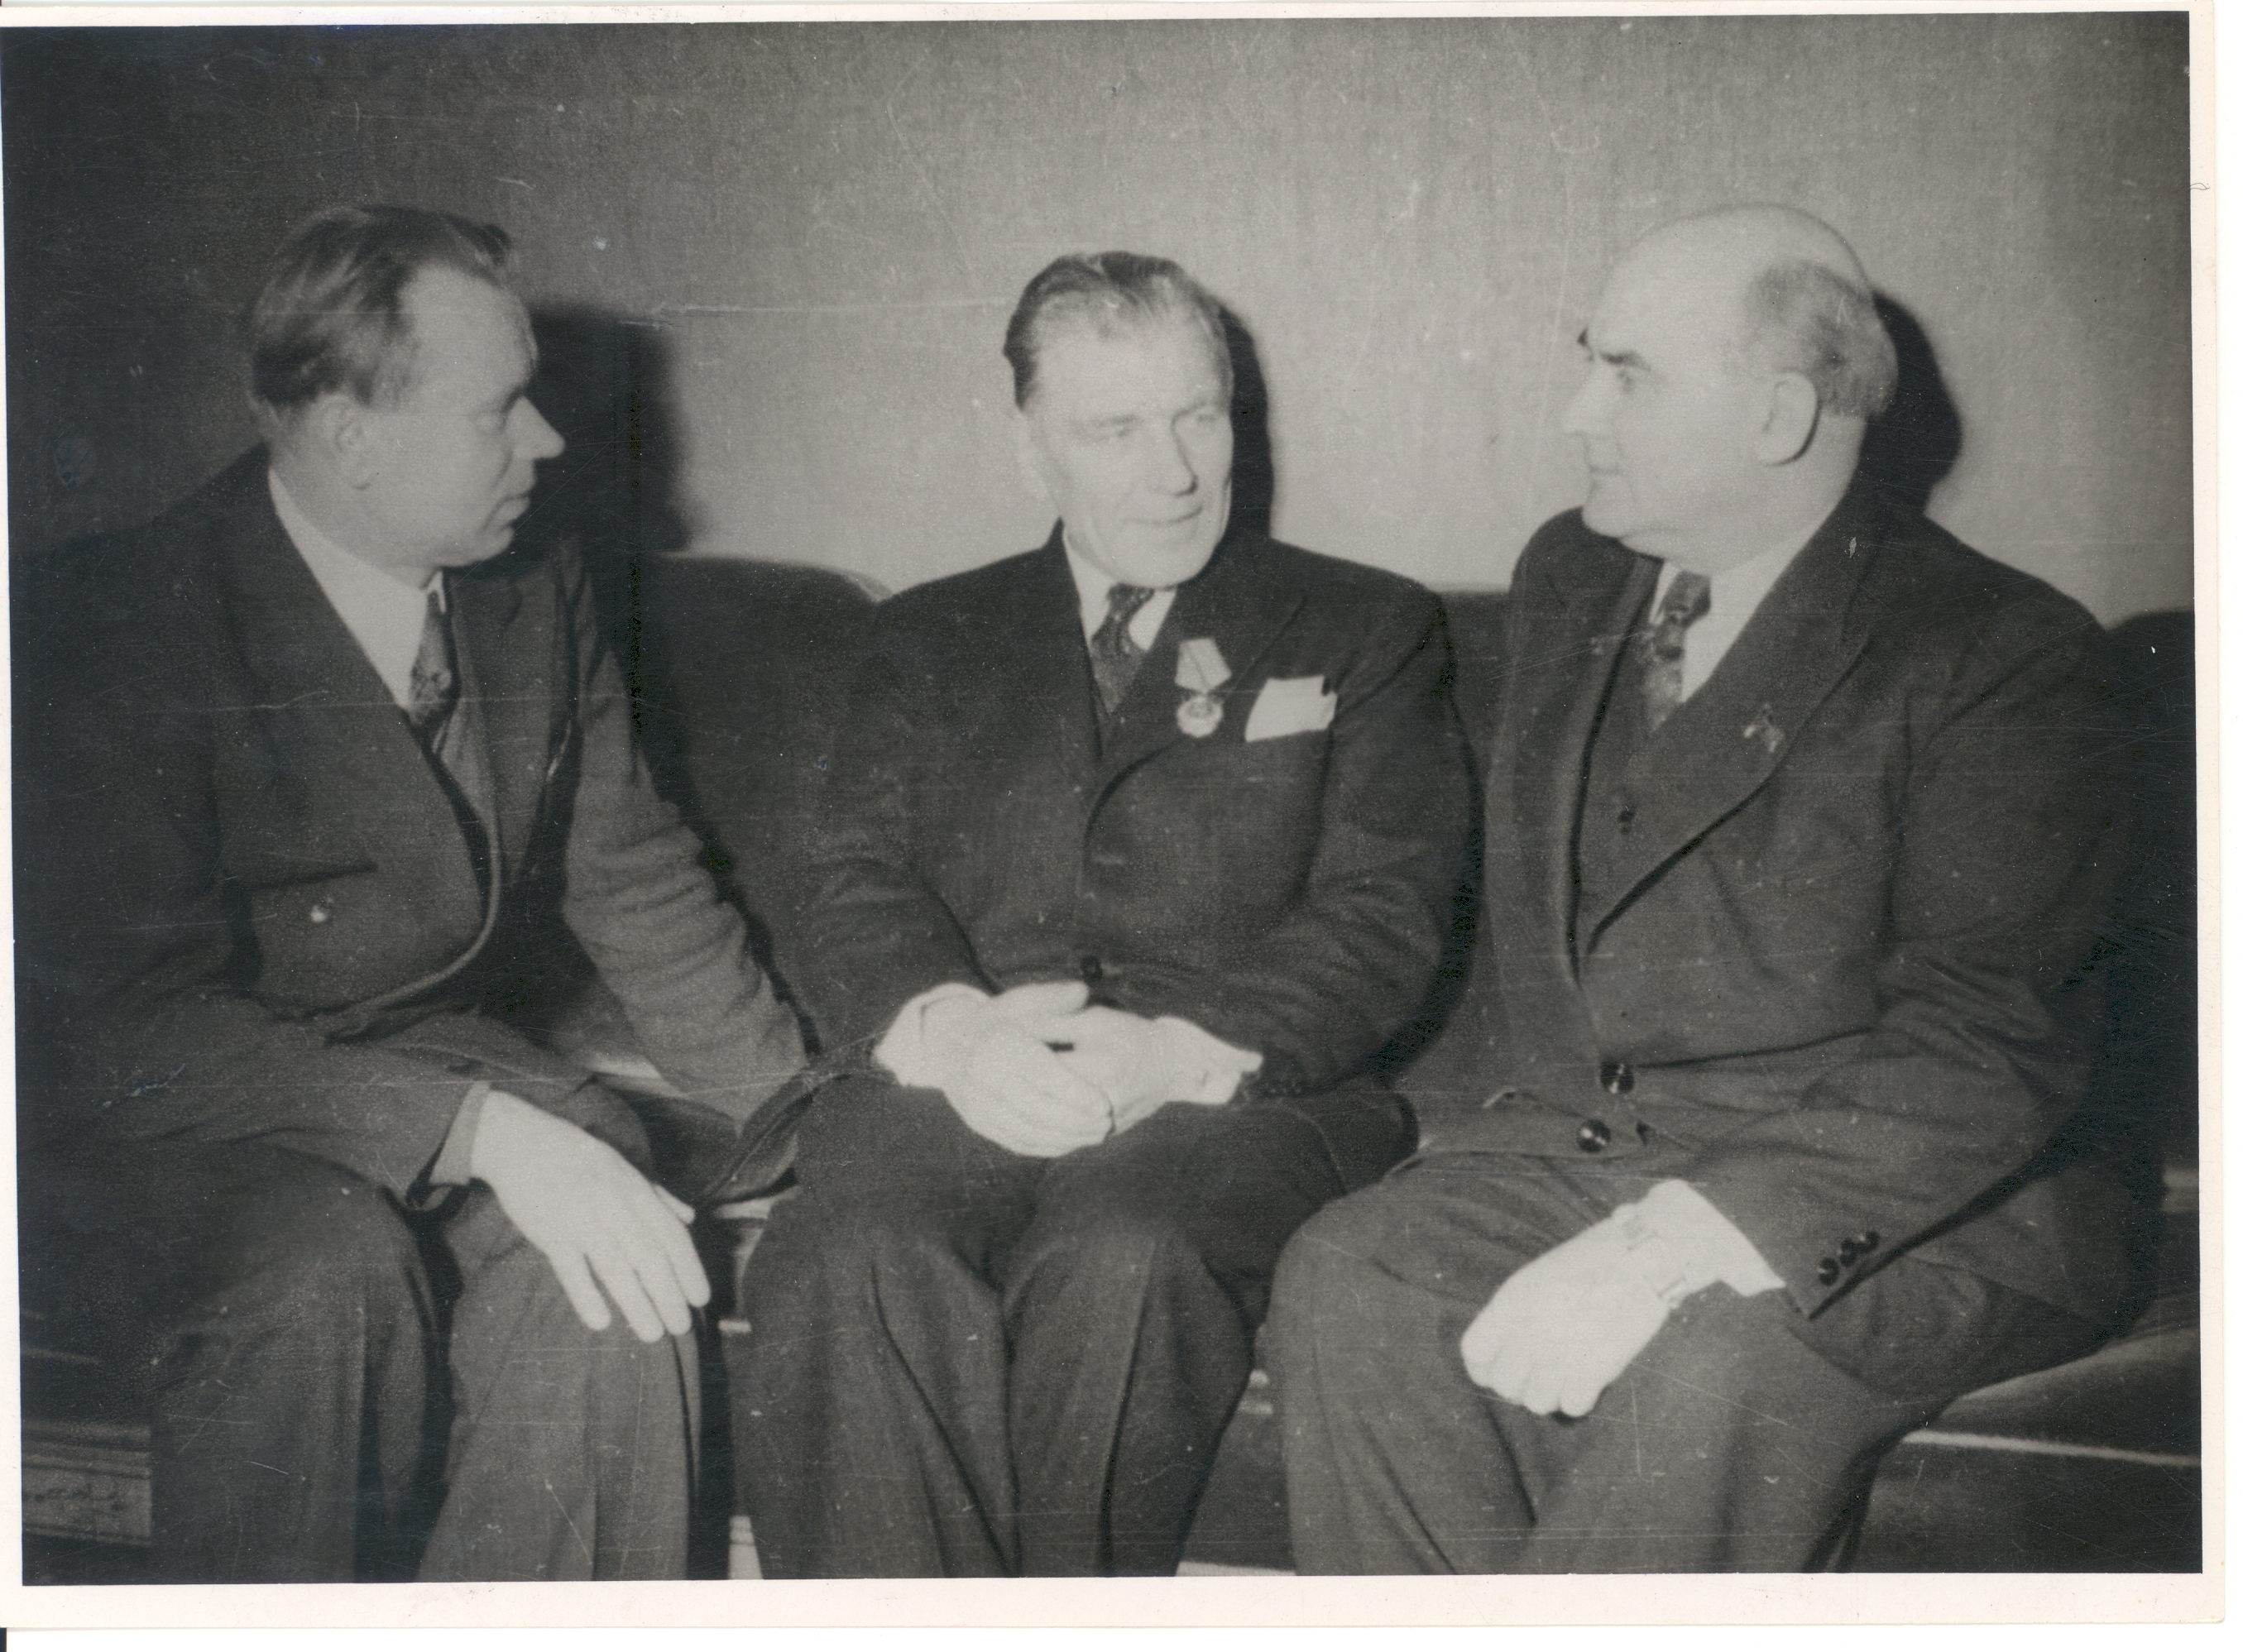 J. Vares-Barbarus (best the first) converses with a. Lauter (in the middle) after receiving the Order of Lenin